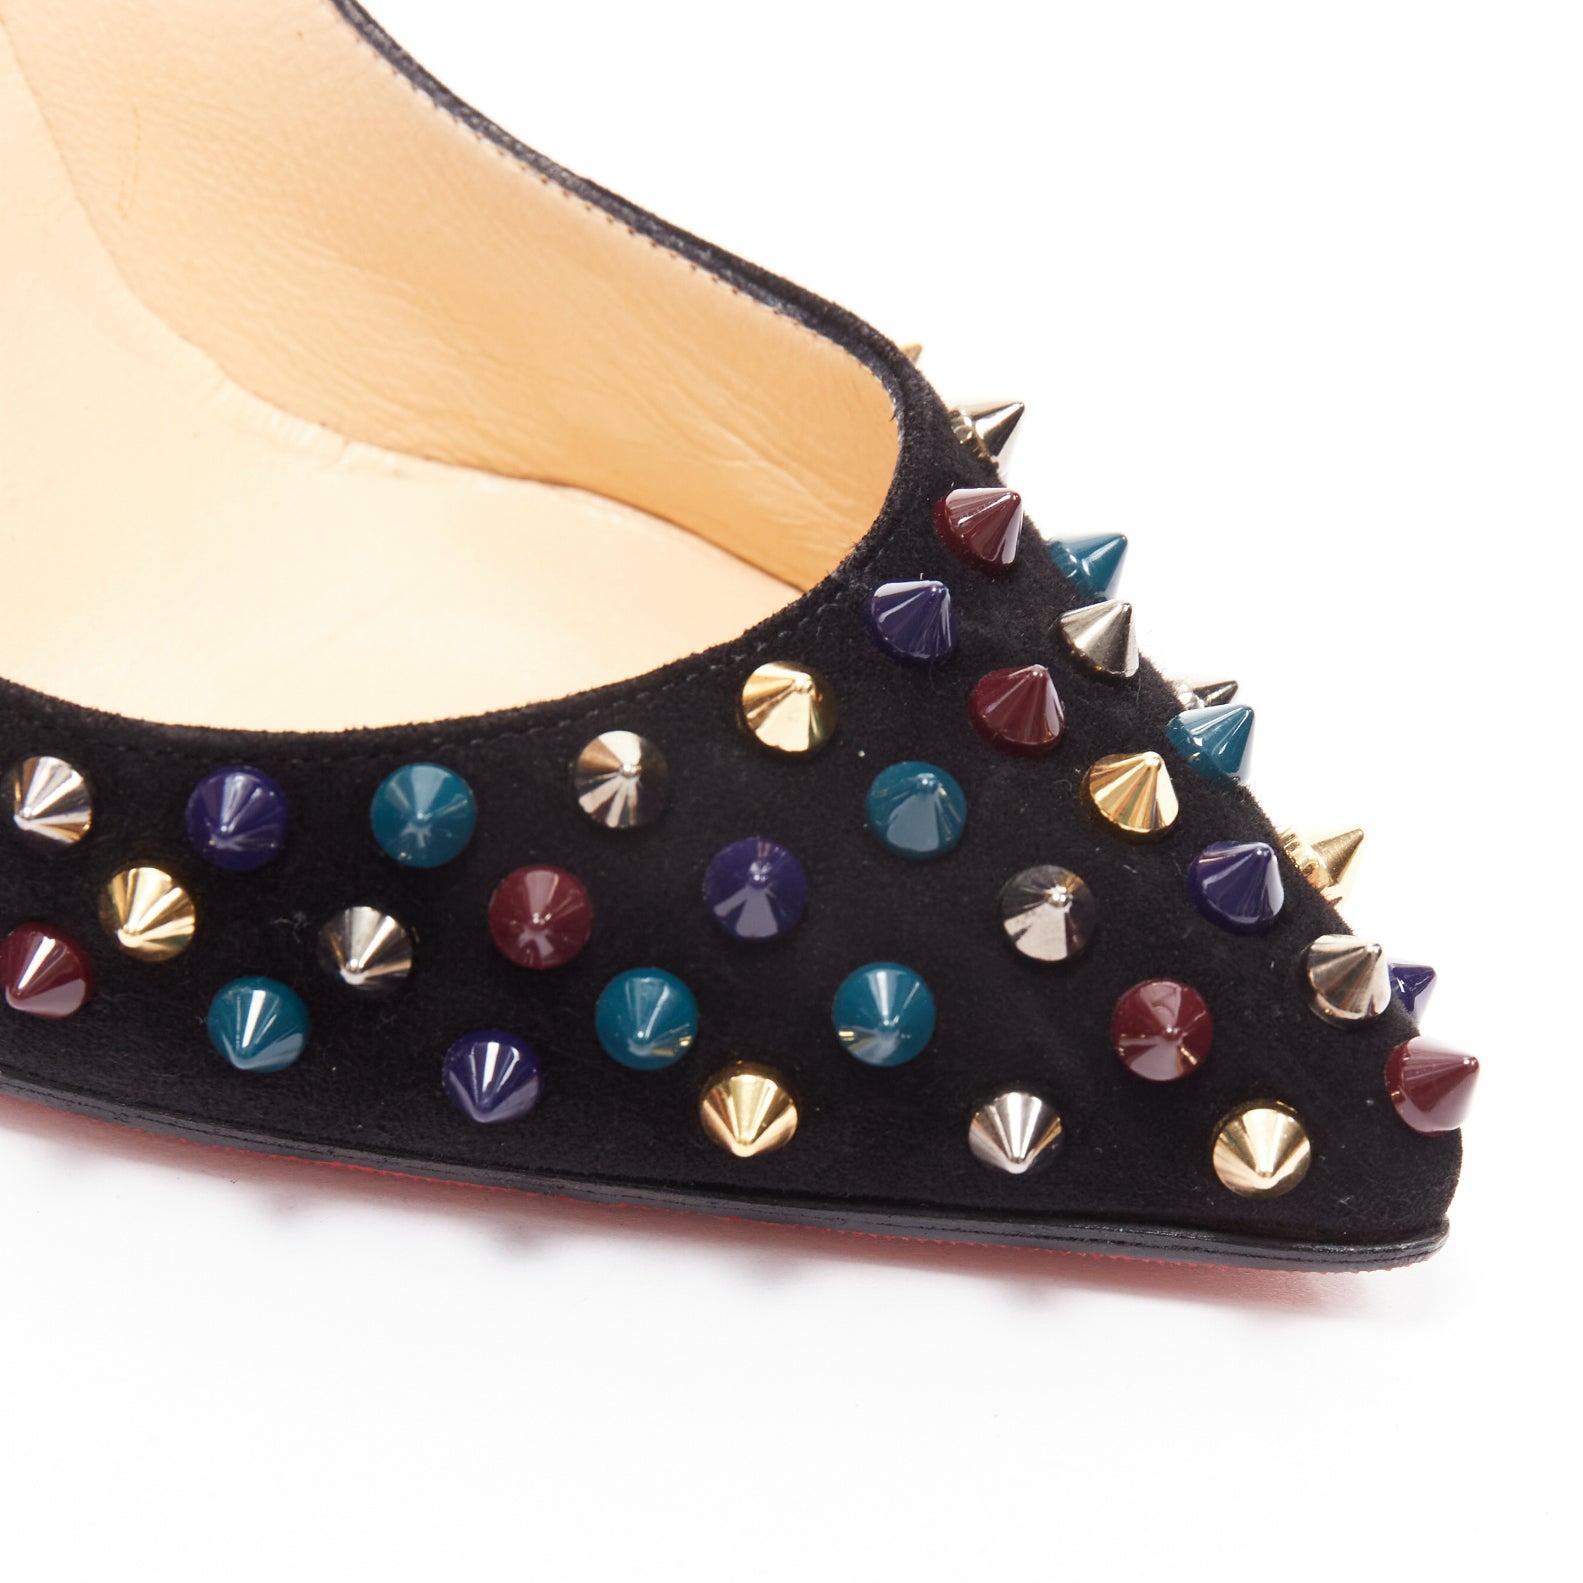 CHRISITAN LOUBOUTI Follies Spikes black suede jewely tone spike pigalle EU36 For Sale 3